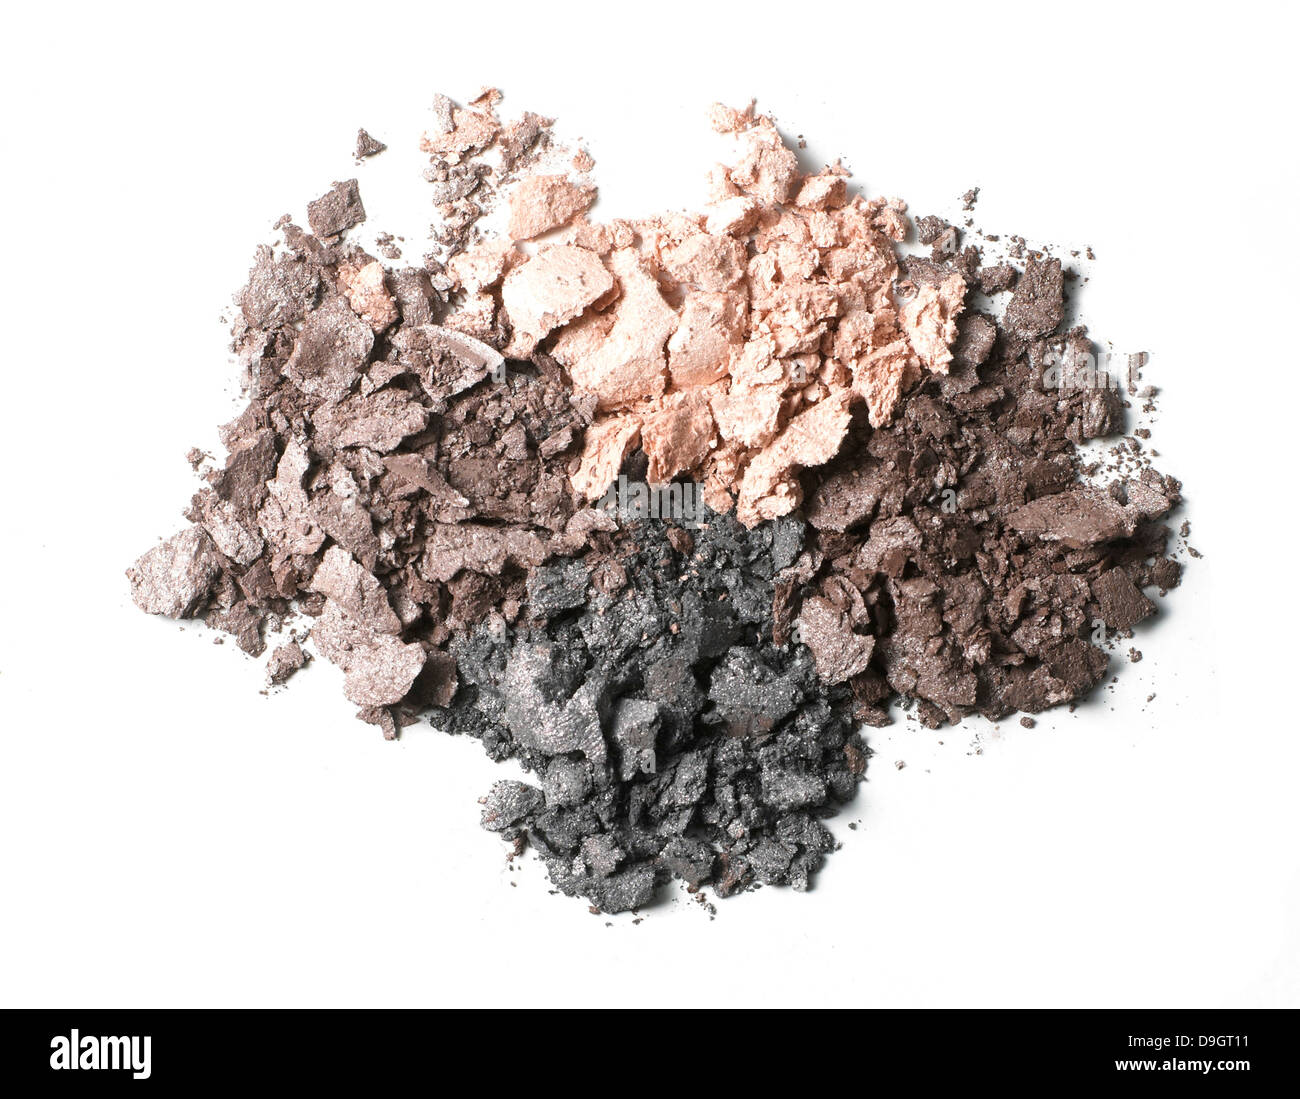 pile of loose dark eyeshadow powder cut out onto a white background Stock Photo